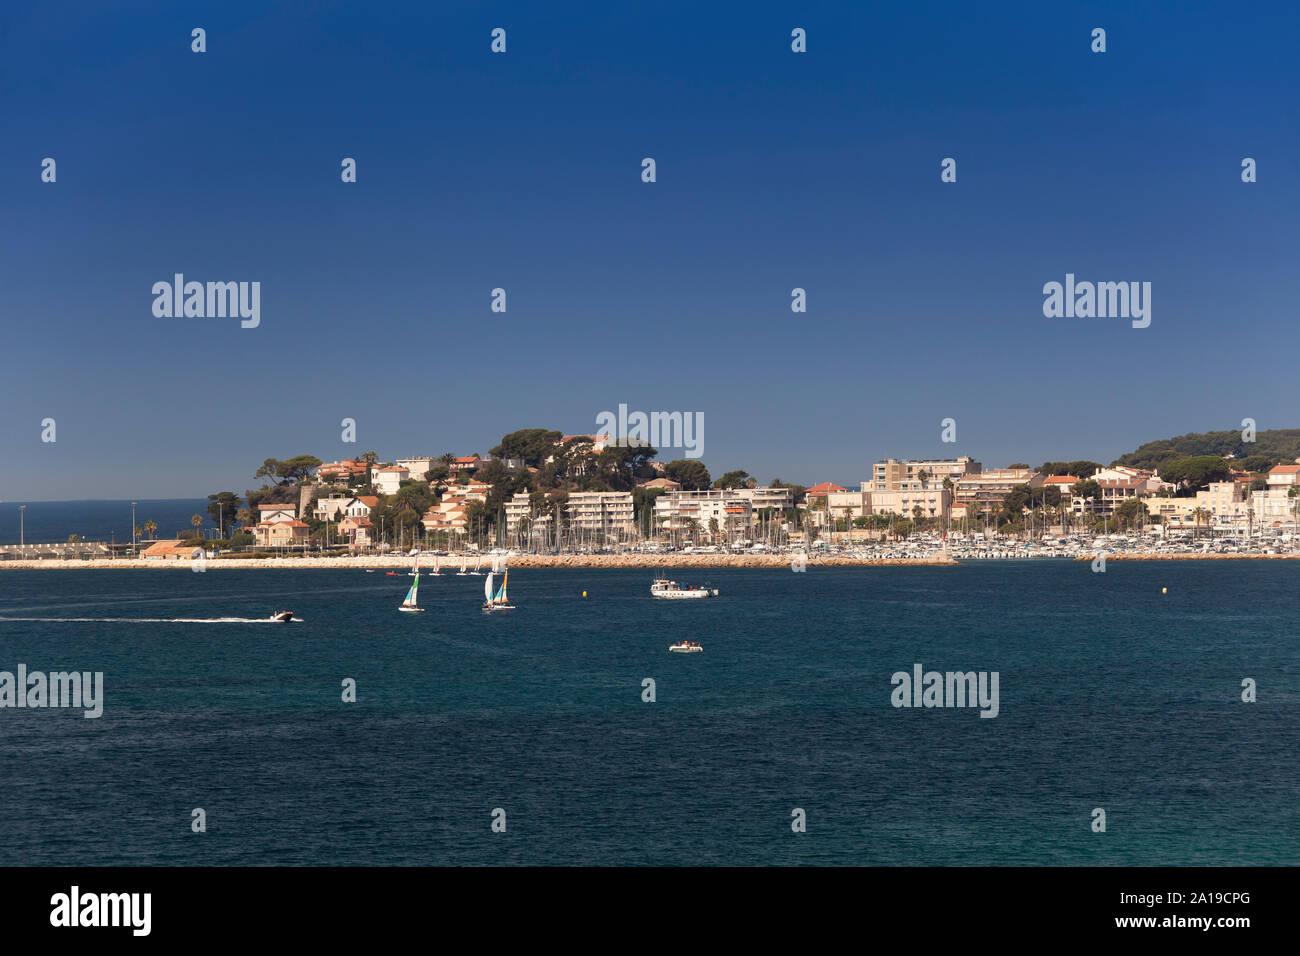 Coastline with hotel facilities at the Bale de Bandol, Bay of Bandol, Alpes-Maritimes, Cote d'Azur, Southern France, France, Europe Stock Photo